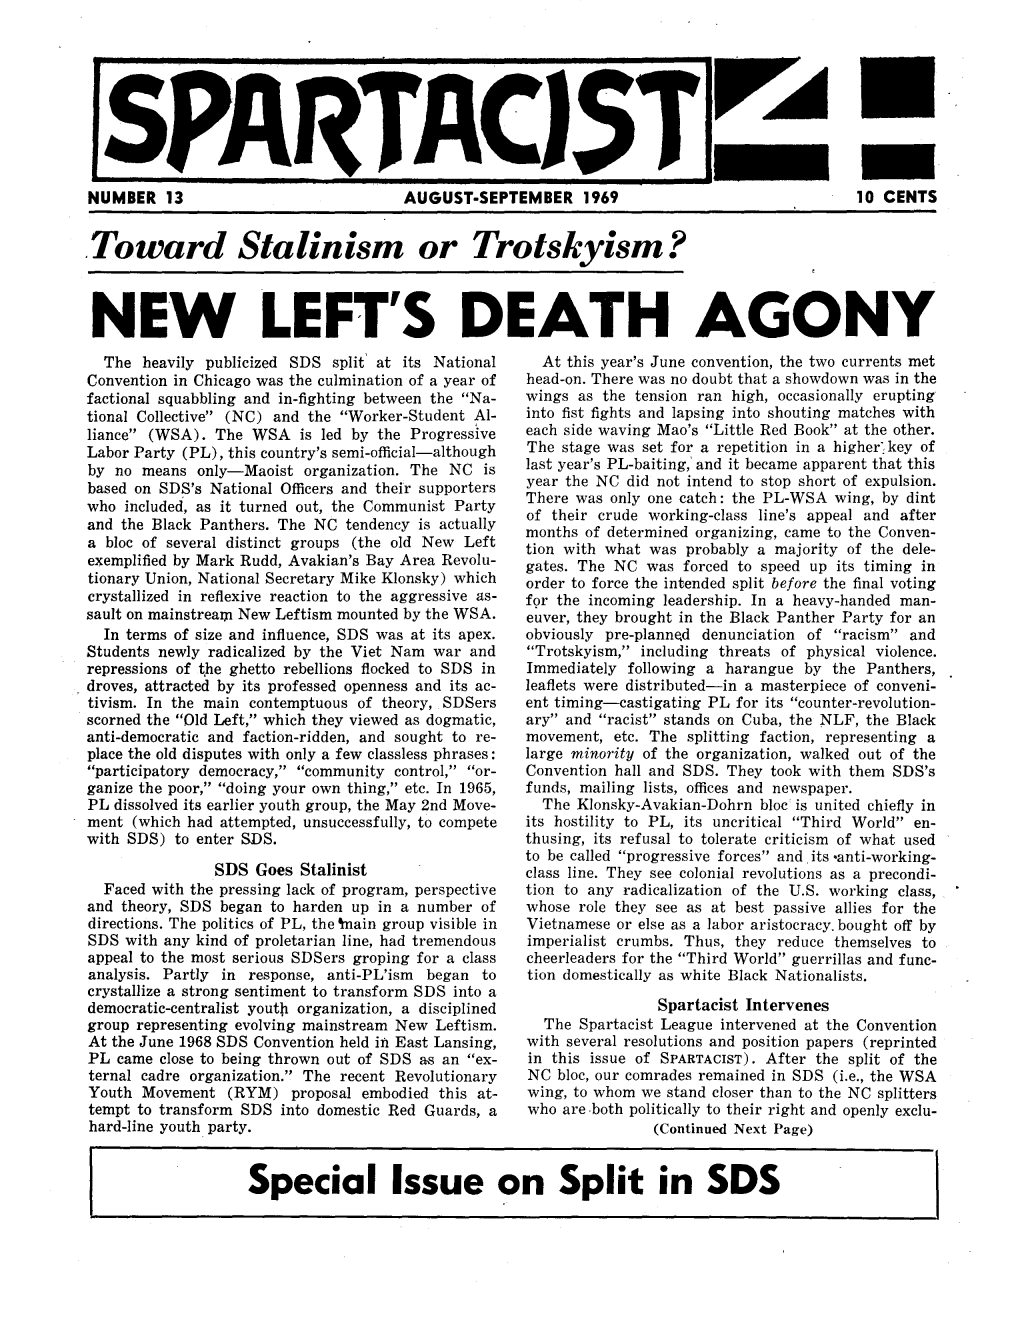 Spartacist Special Issue on the SDS Split: New Left's Death Agony